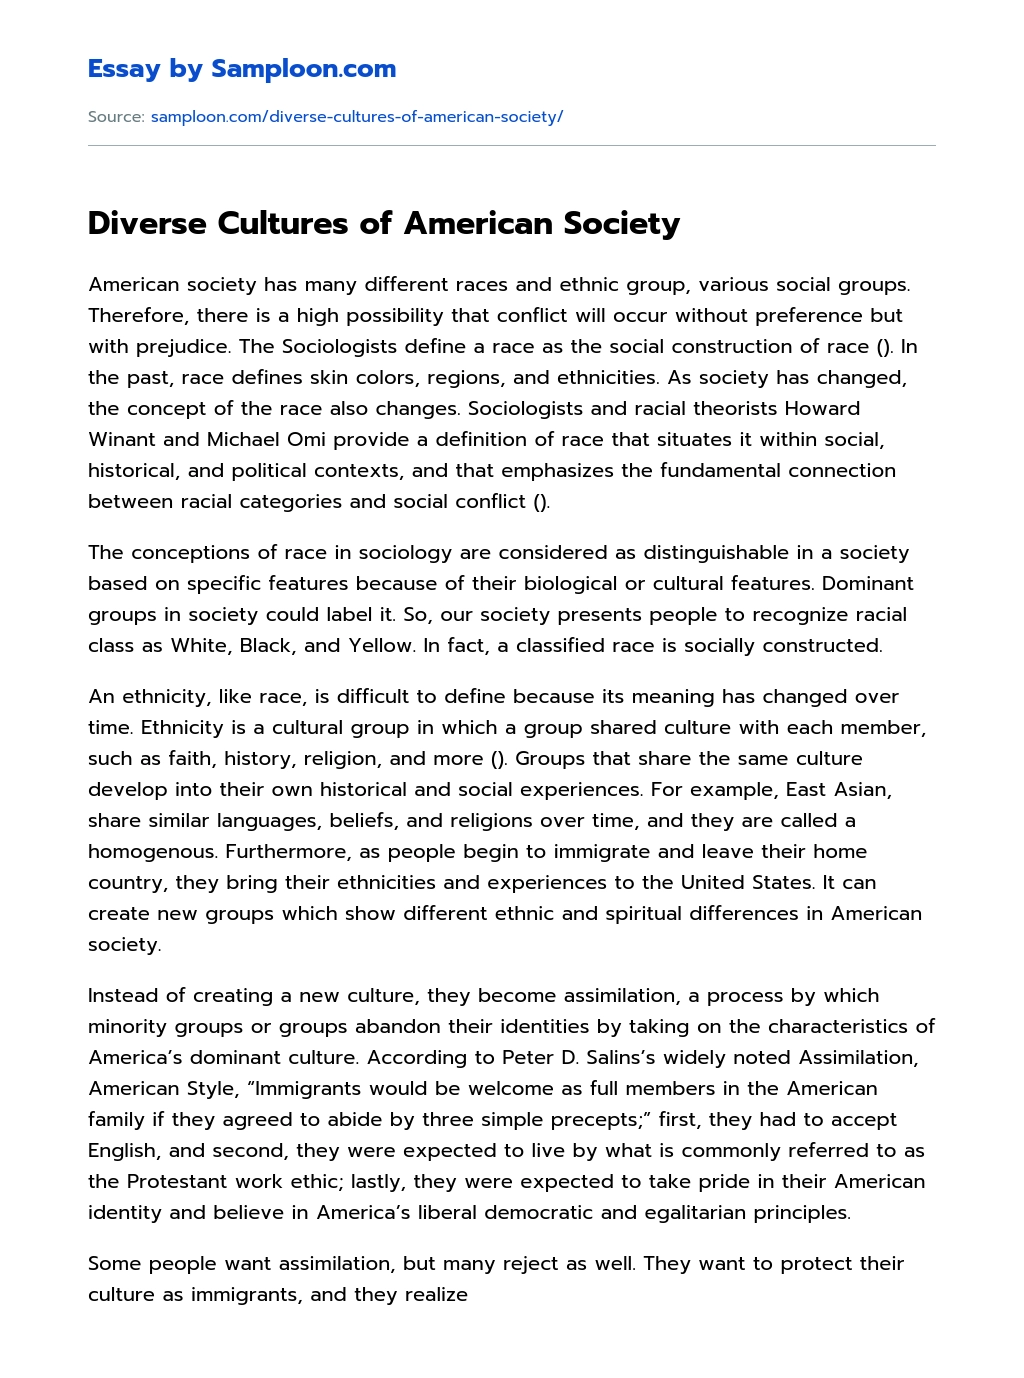 Diverse Cultures of American Society essay